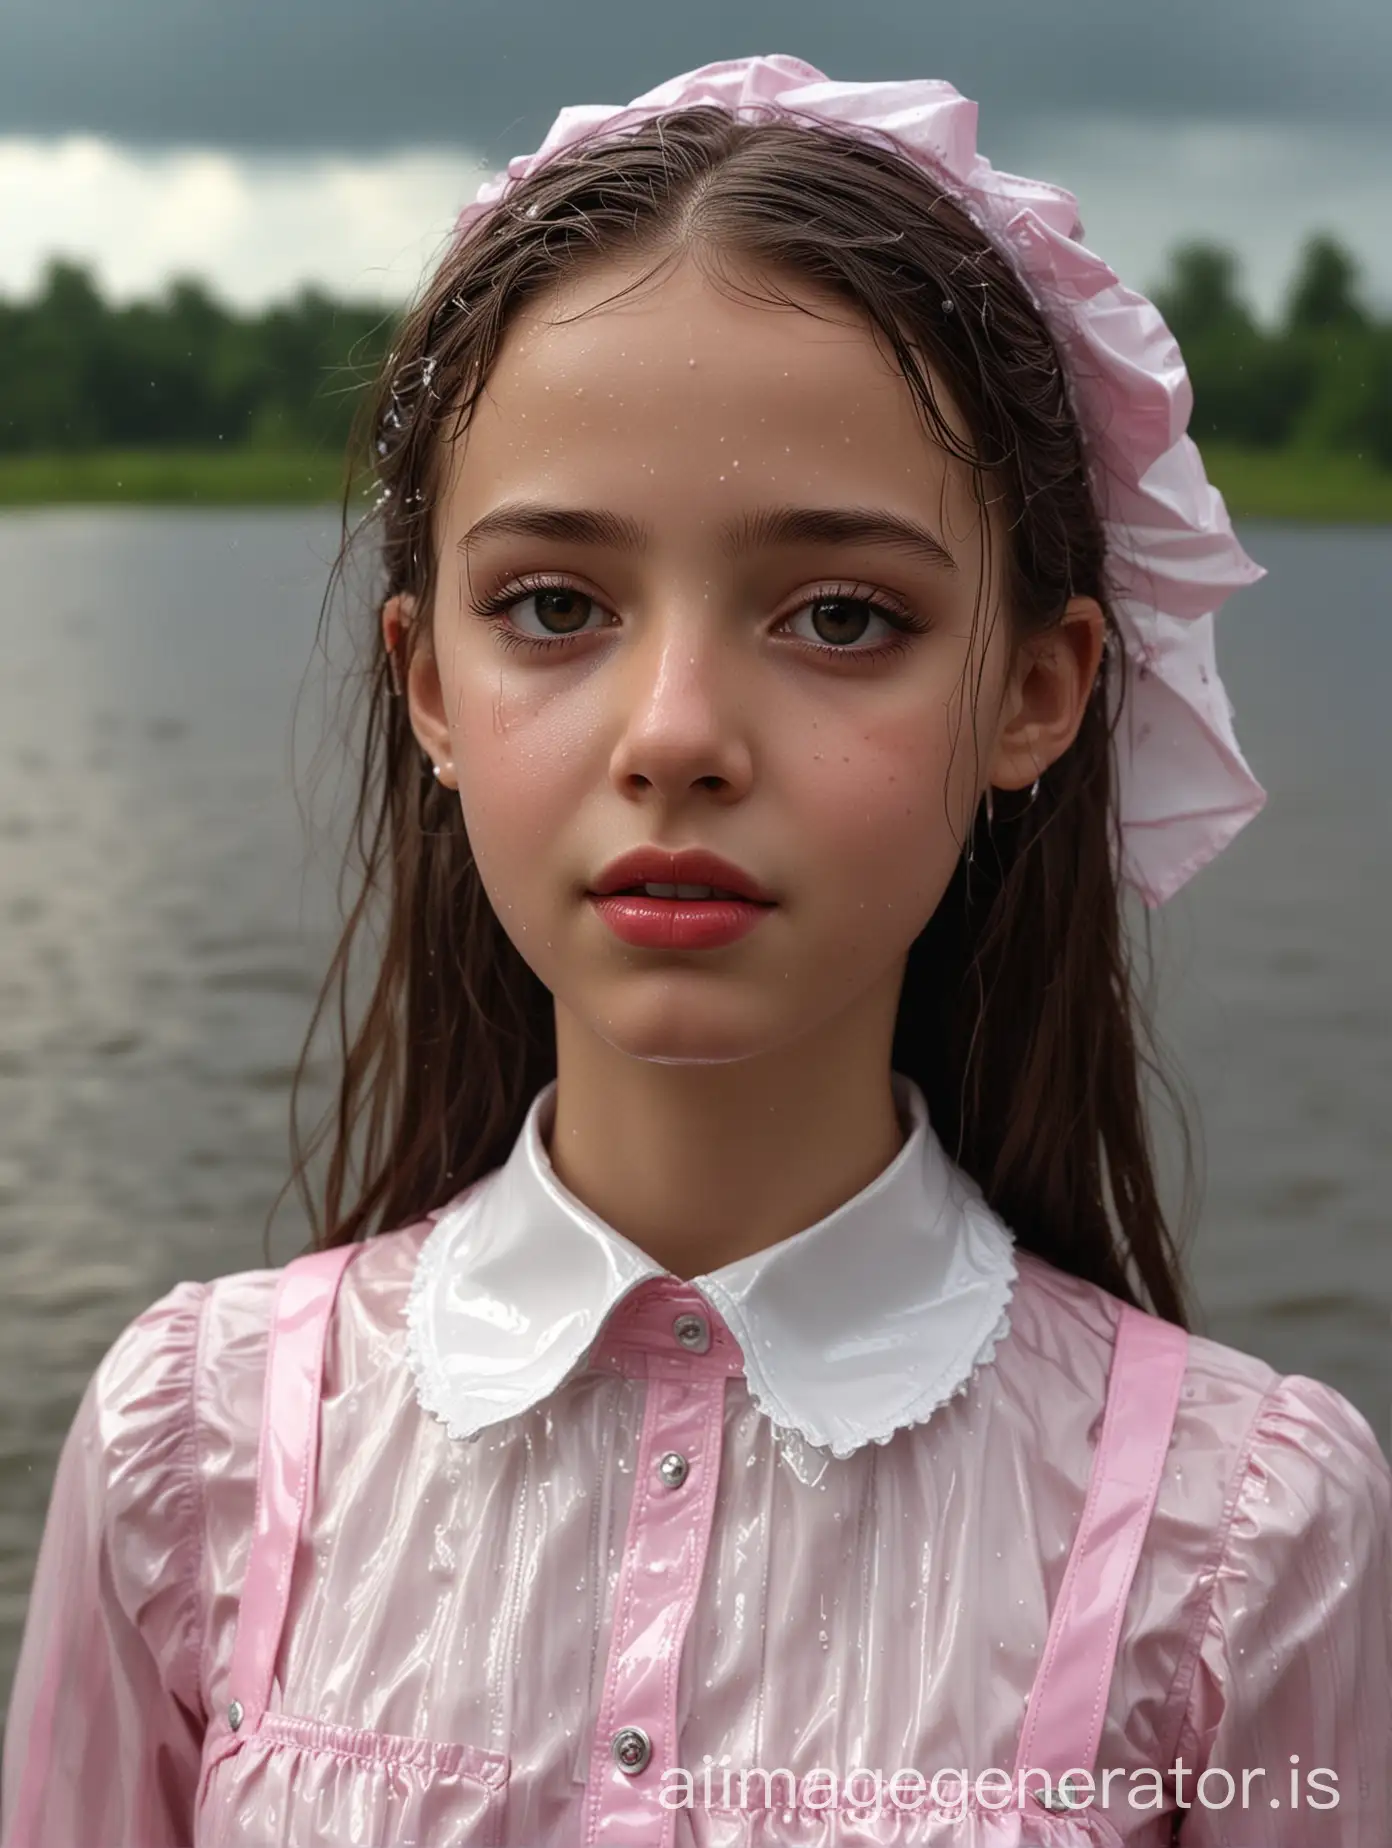 hyperrealistic image in the highest quality. little 9 year old jewish ultraorthodox girl. extremely skinny. extremely white skin. darkbrown eyes. mouth wide open. lips extremely shiny by a lot of the shiniest red lipgloss. she is stepping out of a lake in heavy summer rain. face, hair and clothes are totally wet by the rain. mouth is filled with rain. she is wearing an extremely shiny latex sweet lolita outfit. striped in pink and white. shiny latex shirt. long puffy sleeves. collared and fully closed up. shiny latex ribbon over the collar. big shiny latex ribbon in the hair. short but wide latex skirt. she wears a shiny latex pinafore over shirt and skirt. shiny pantyhose, shiny patent leather shoes. she wears no jewellery. no elements of stones or metal.